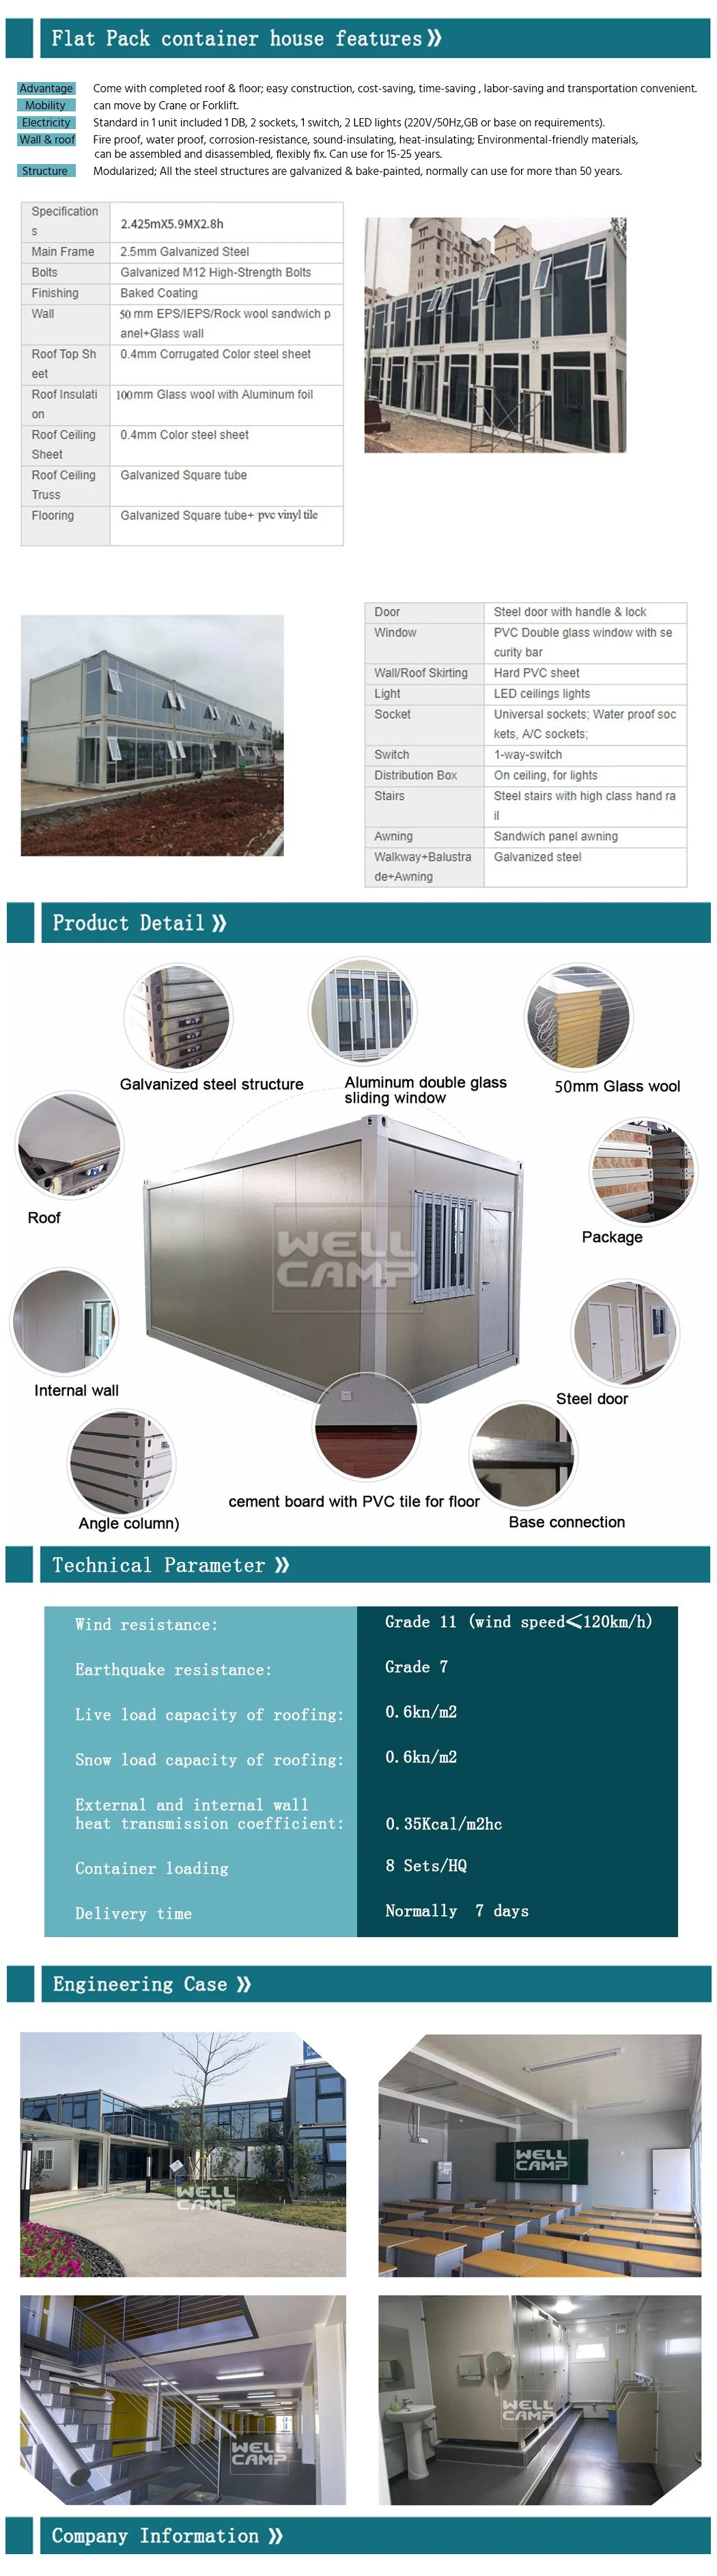 Two Floor Flat Pack Container House Container Apartment Container Office